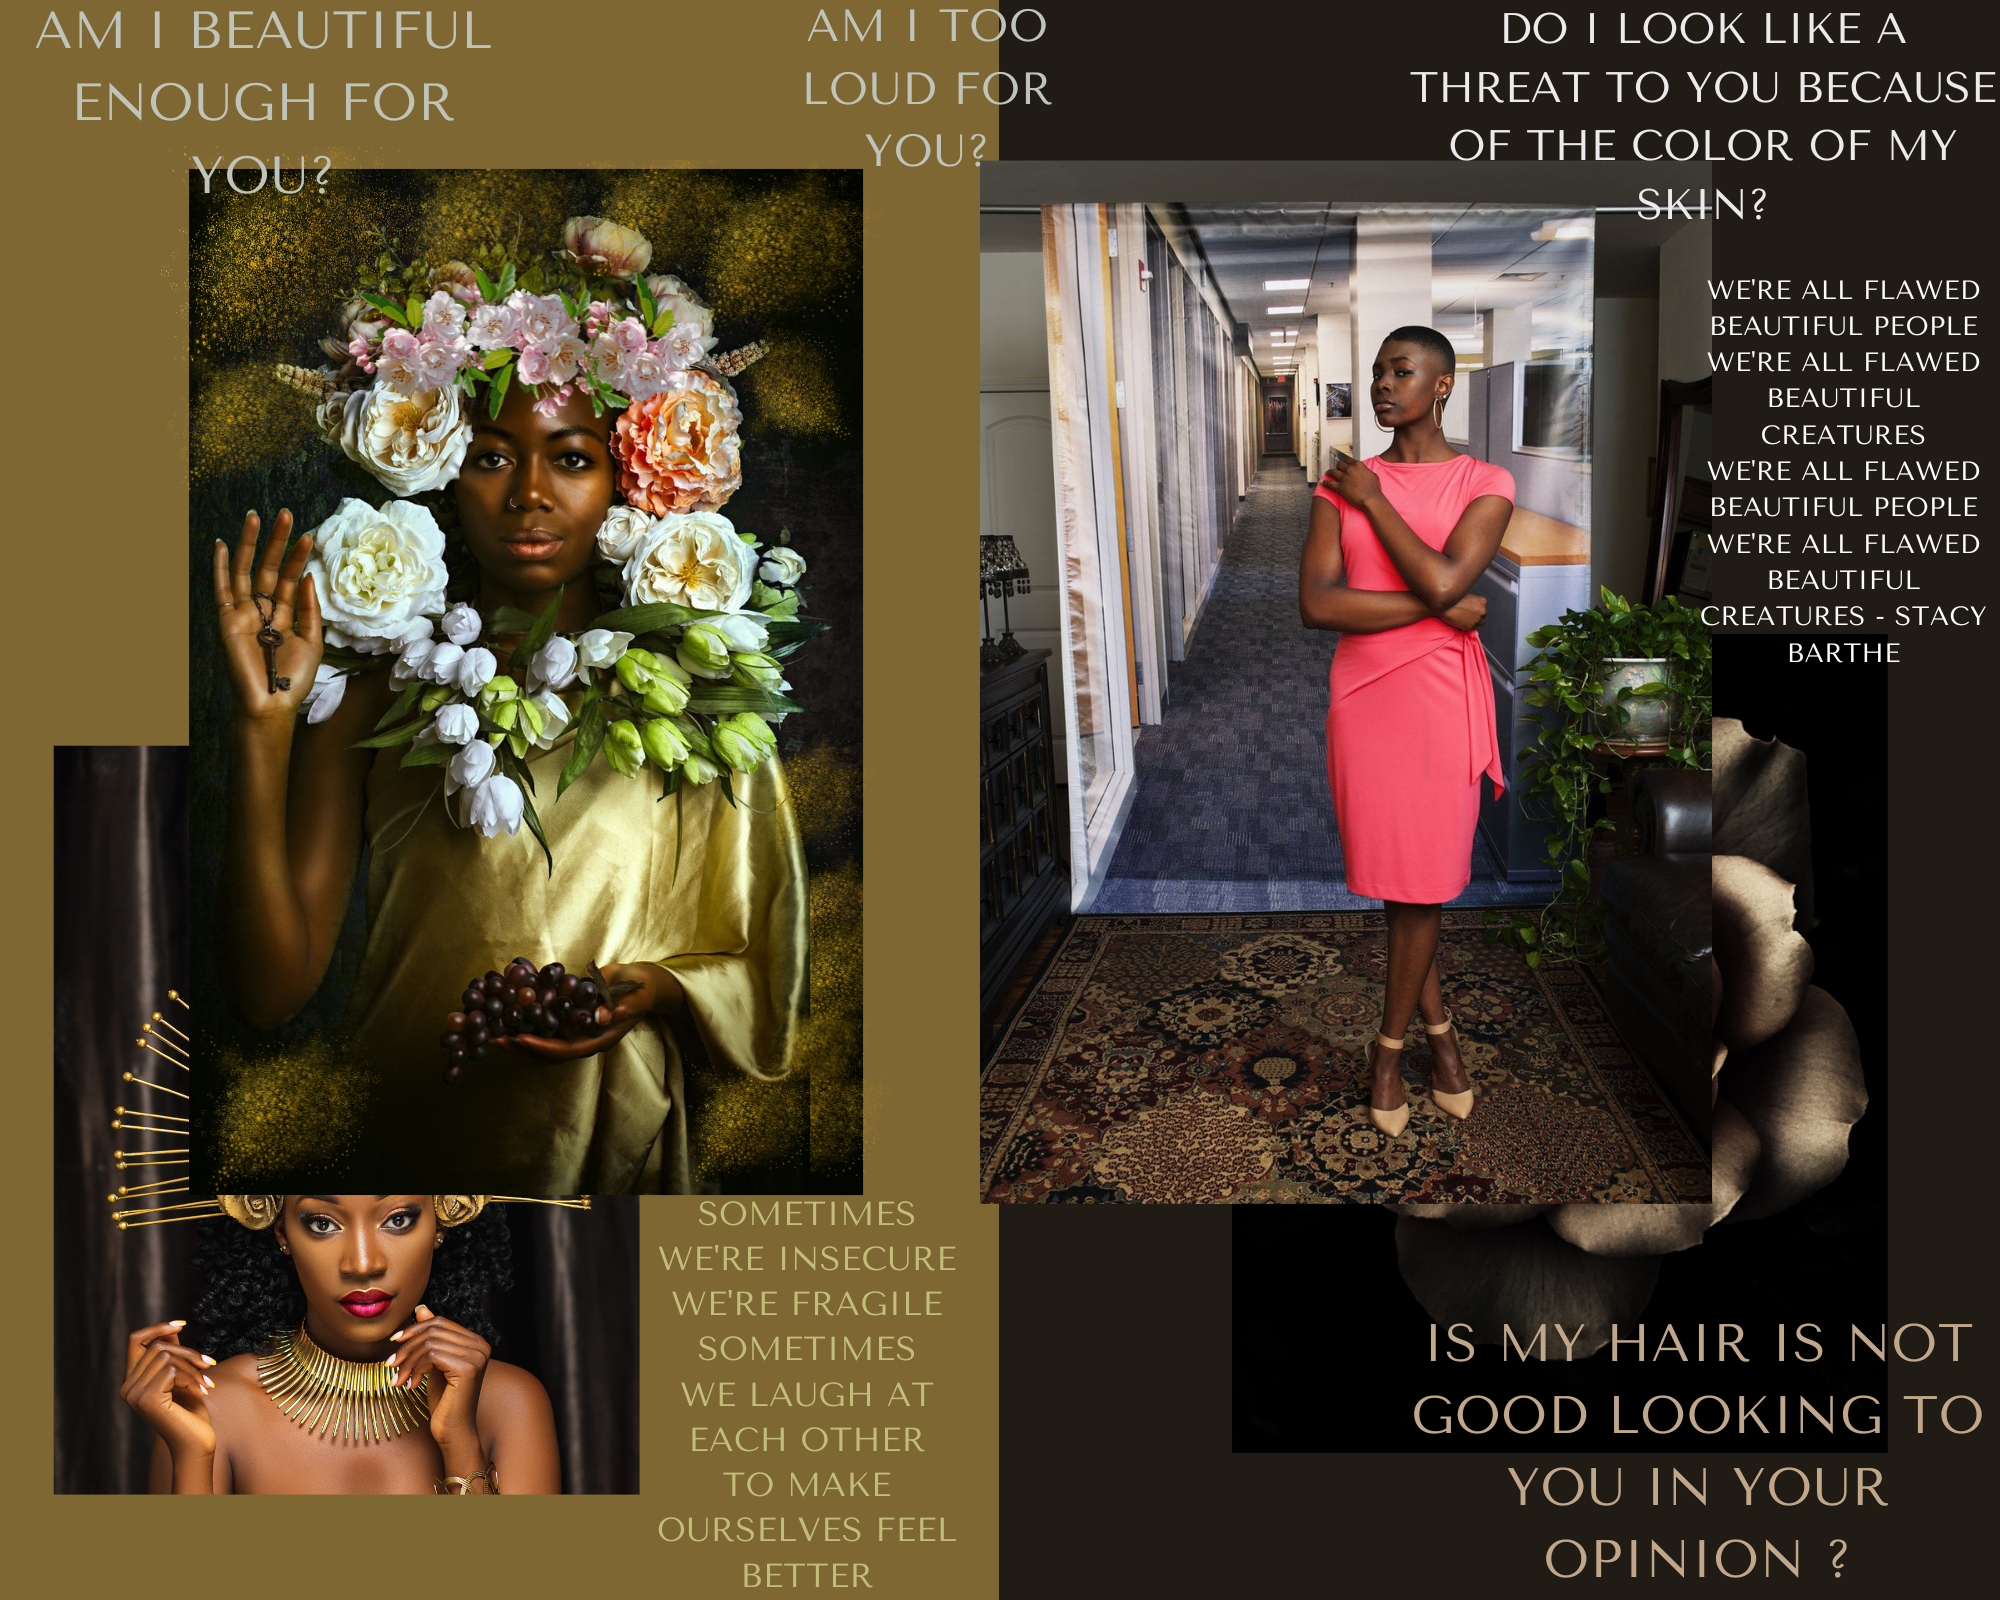 Stereotypes Moodboard by Davanye Bowser